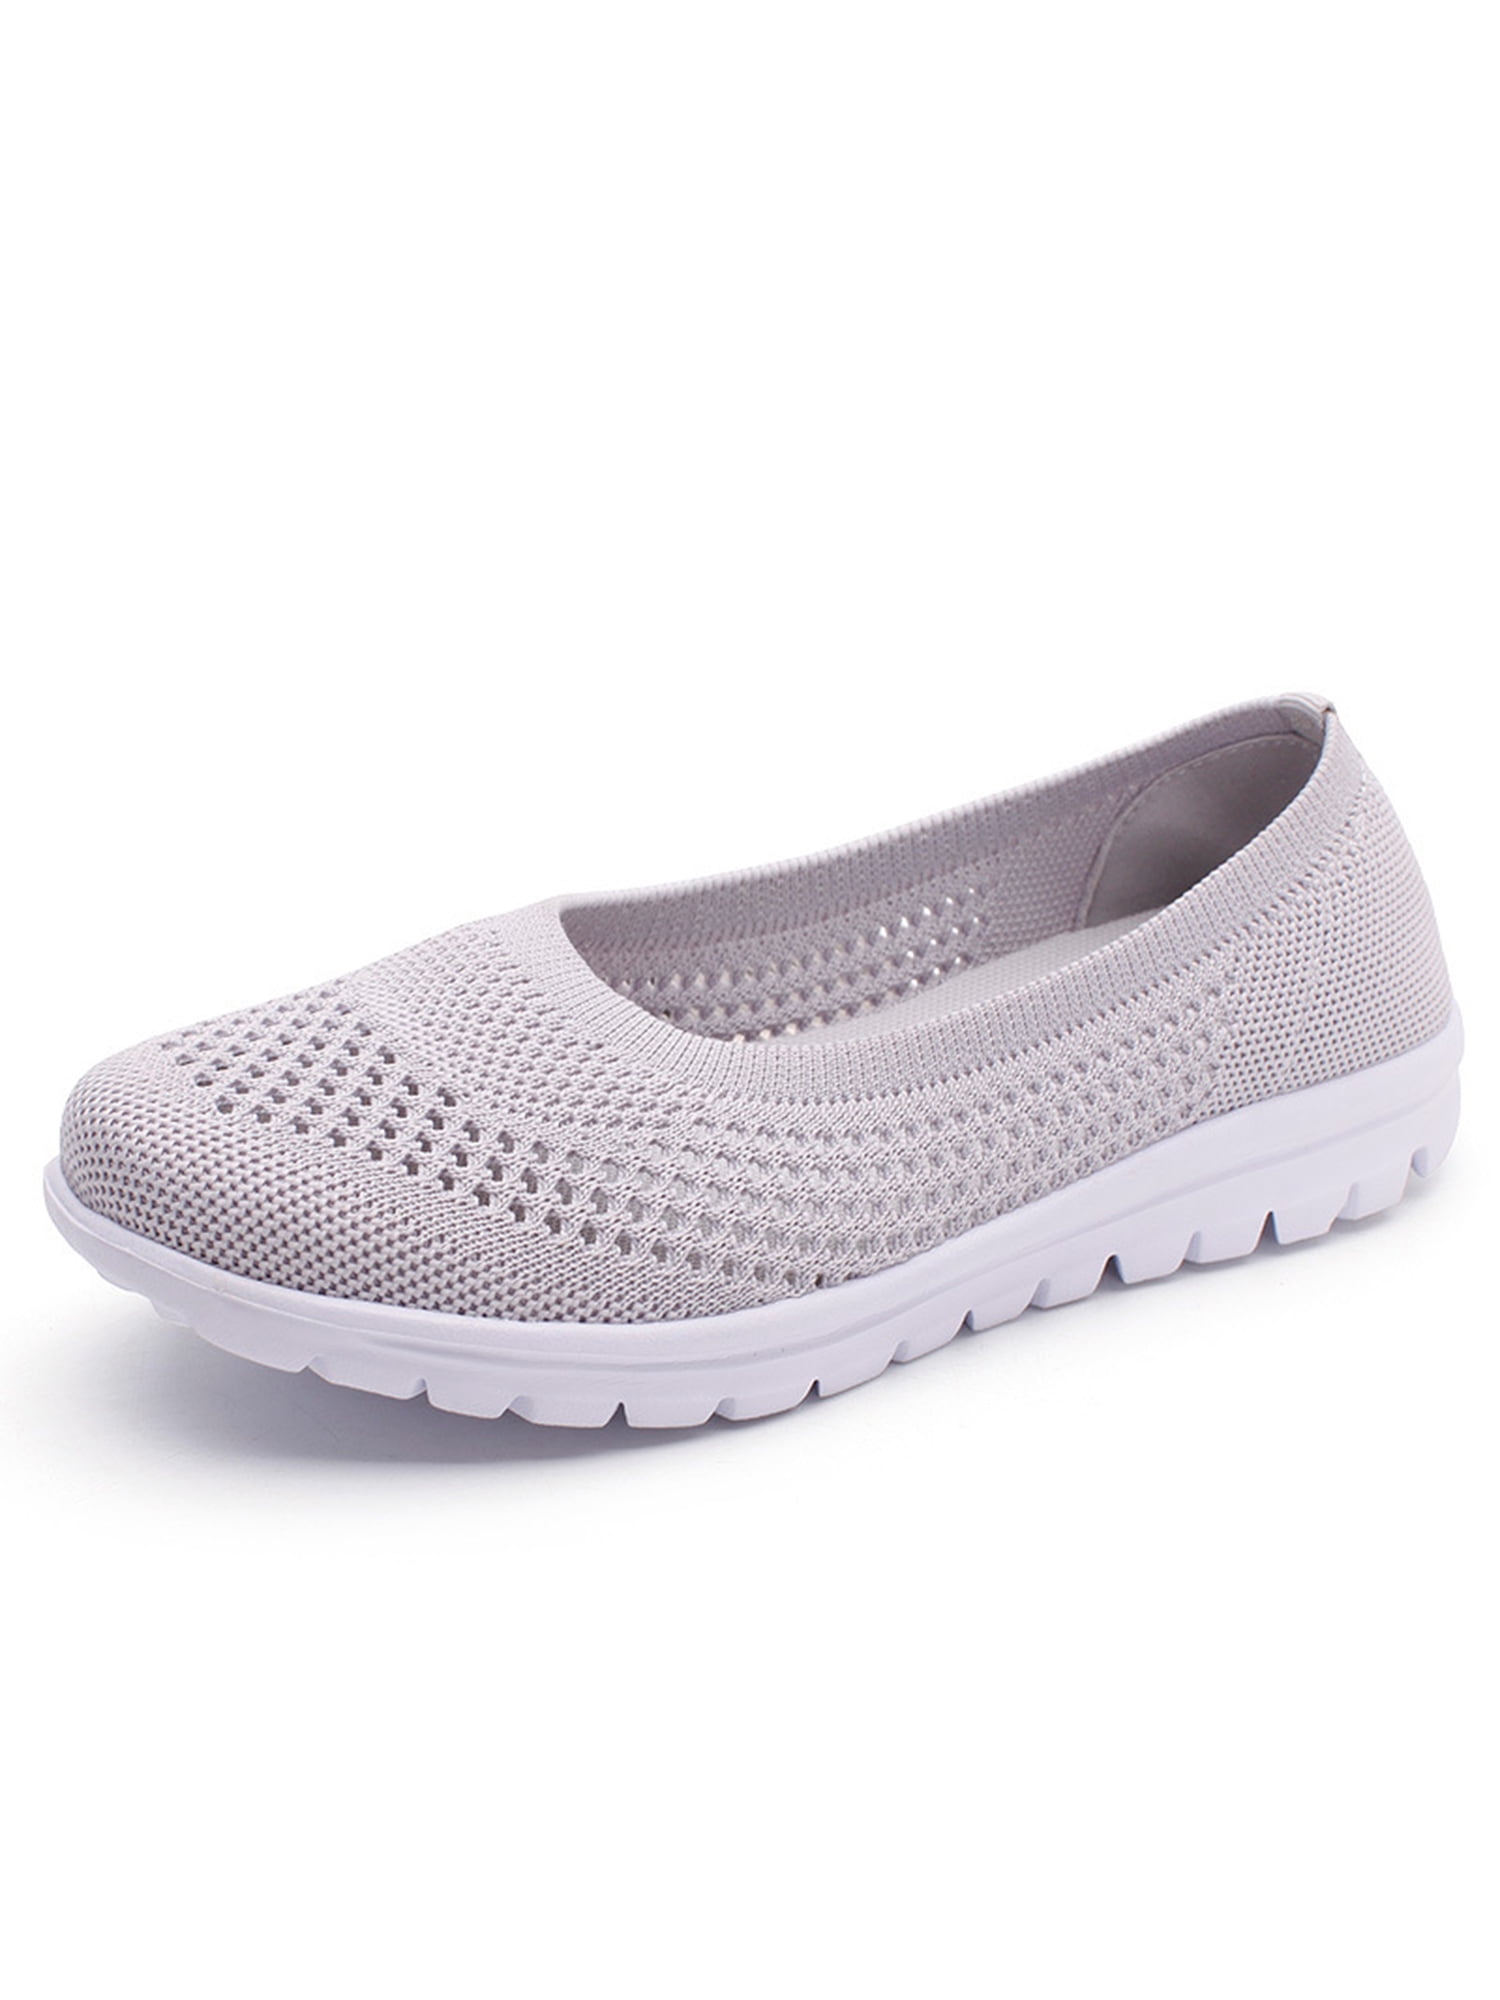 Details about   New Flat-Bottom Mesh Women's Casual Shoes Walking Shoes Non-Slip Sneakers 